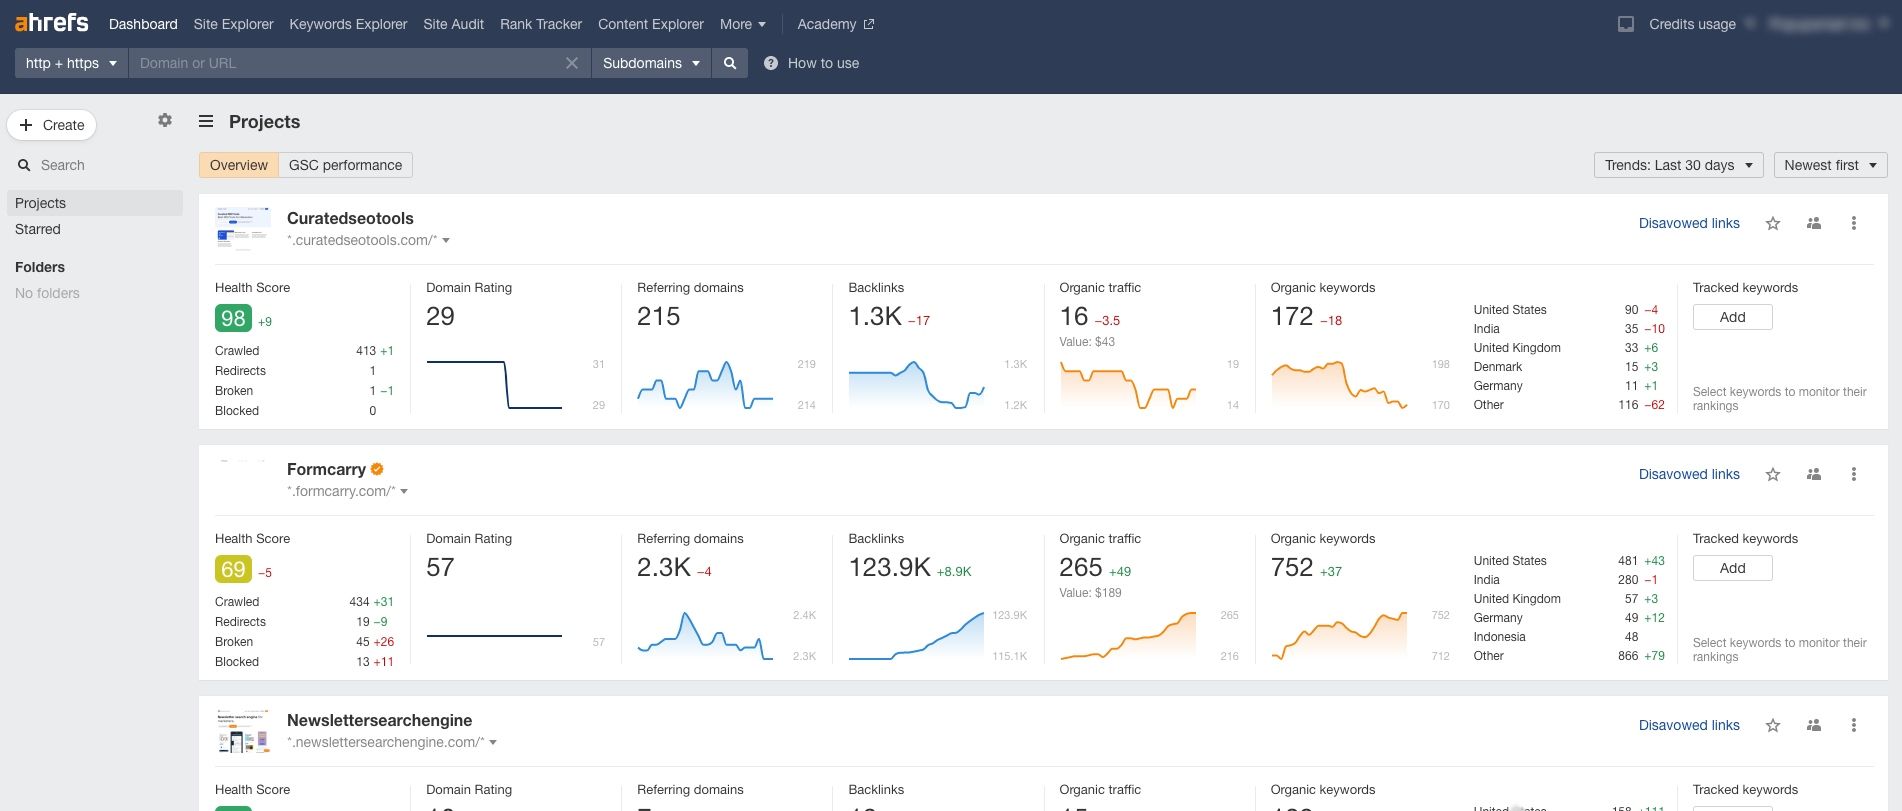 The dashboard of Ahrefs, one of the most popular SEO tools